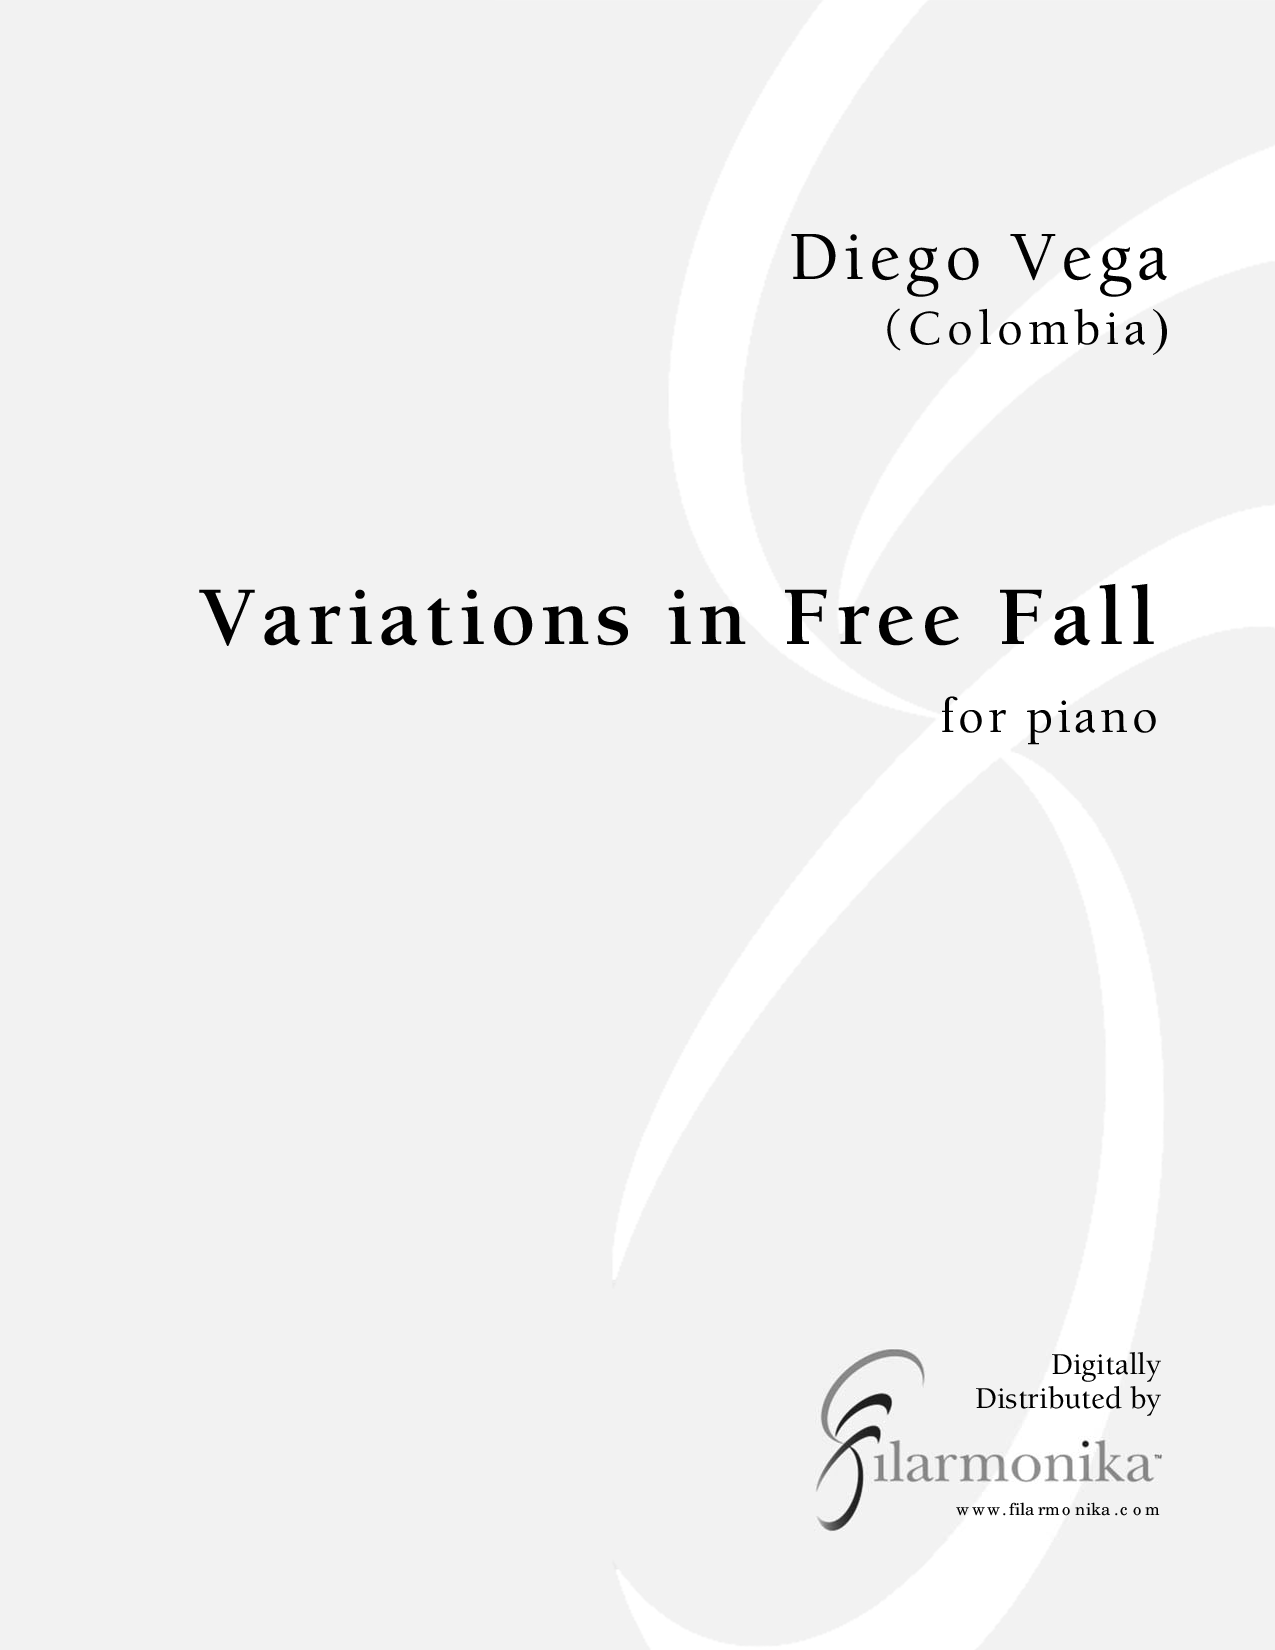 Variations in Free Fall, for piano